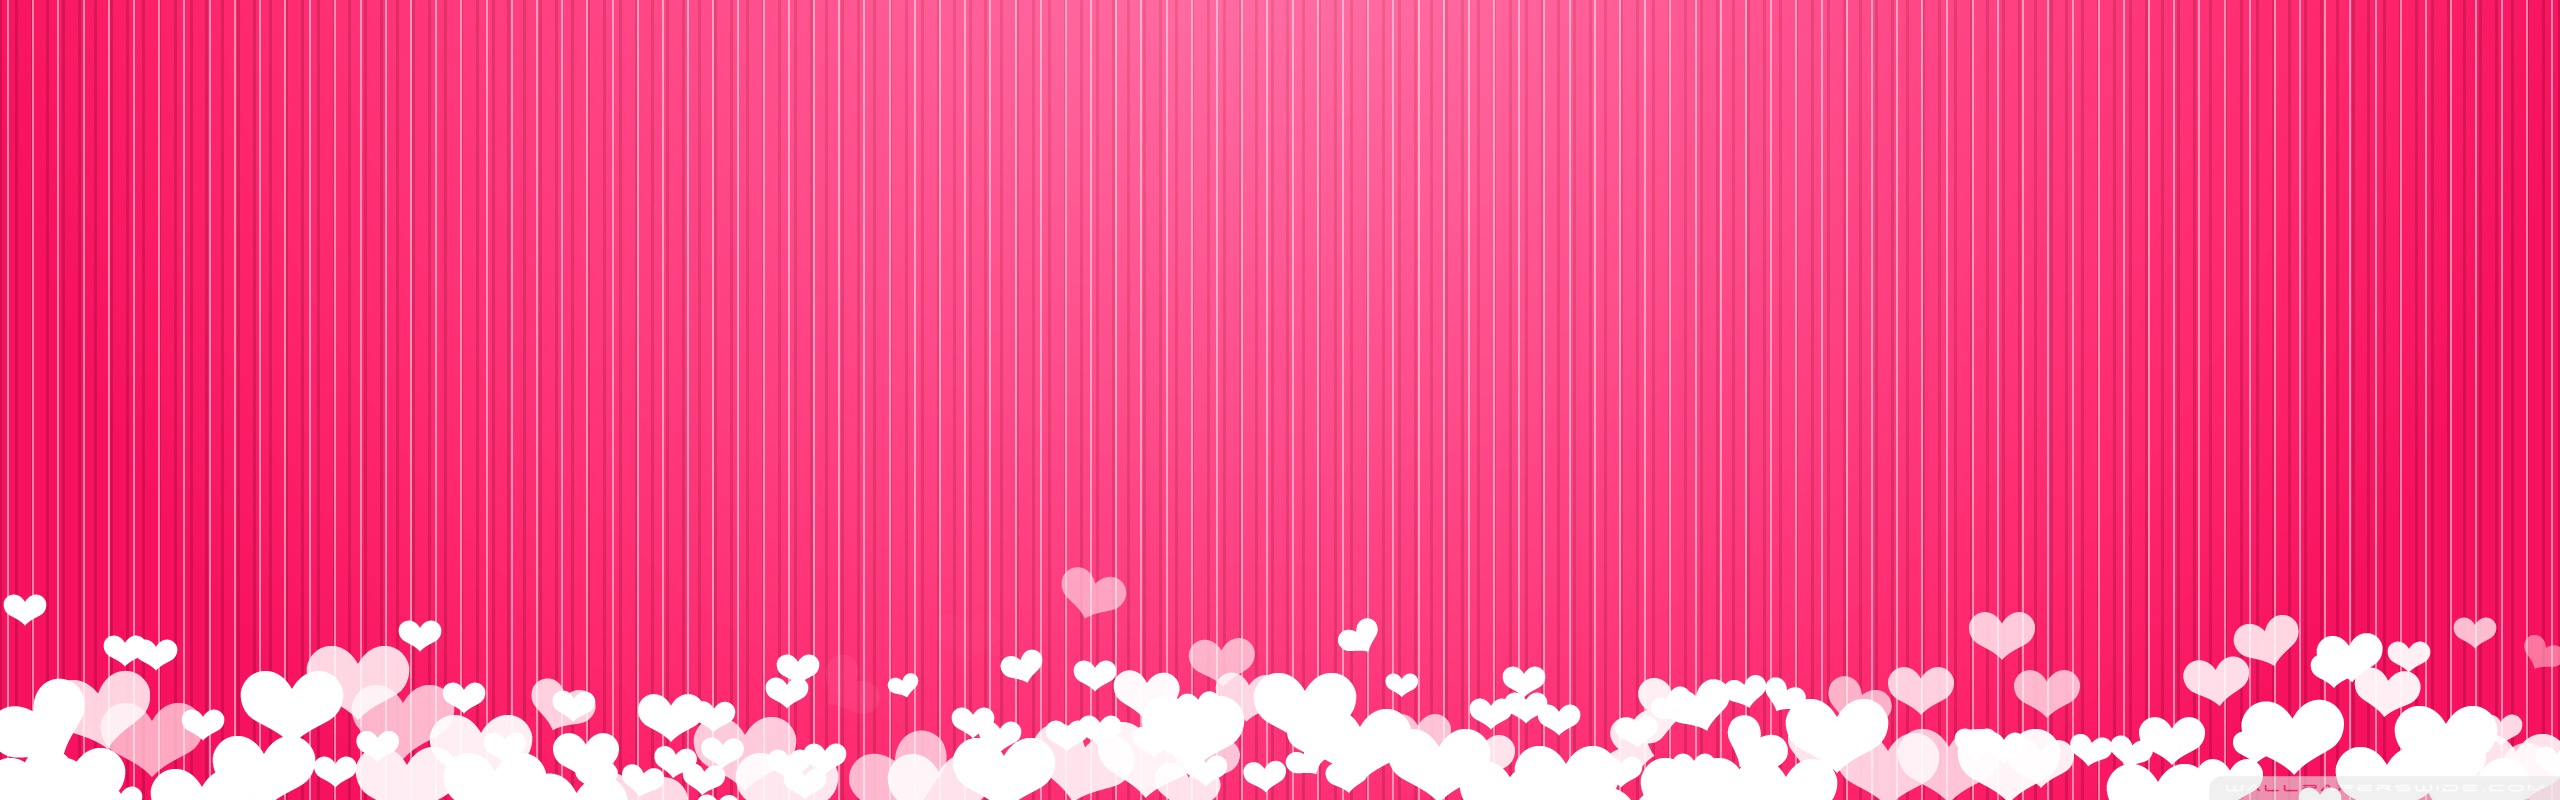 Valentine's Day 2012 (Pink) Ultra HD Desktop Background Wallpaper for: Multi Display, Dual Monitor, Tablet